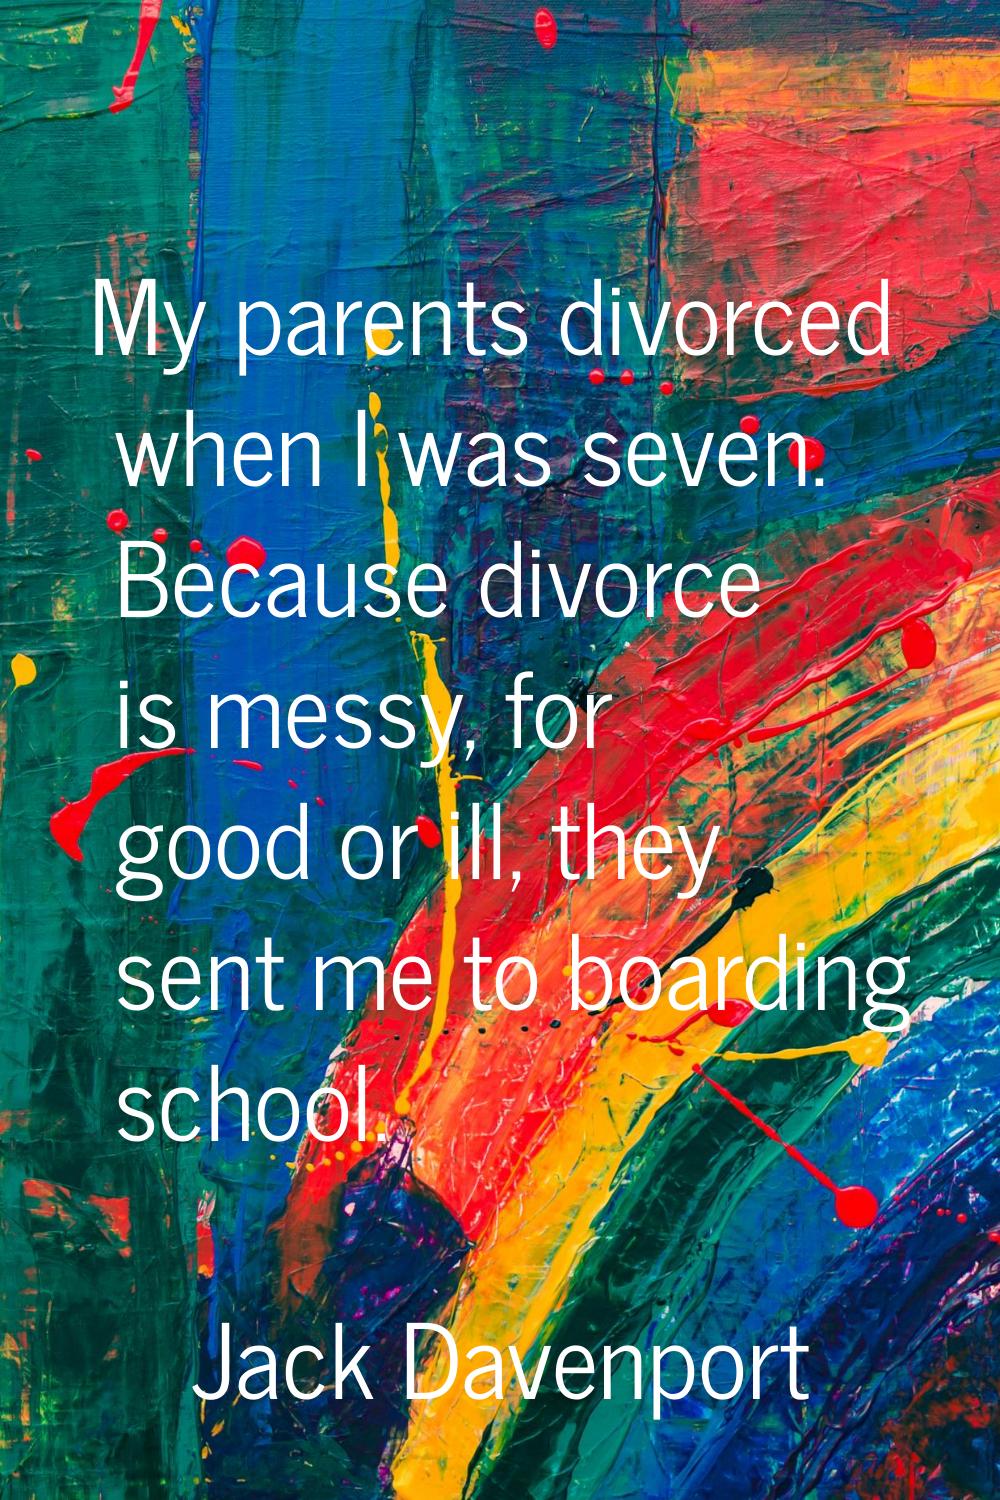 My parents divorced when I was seven. Because divorce is messy, for good or ill, they sent me to bo